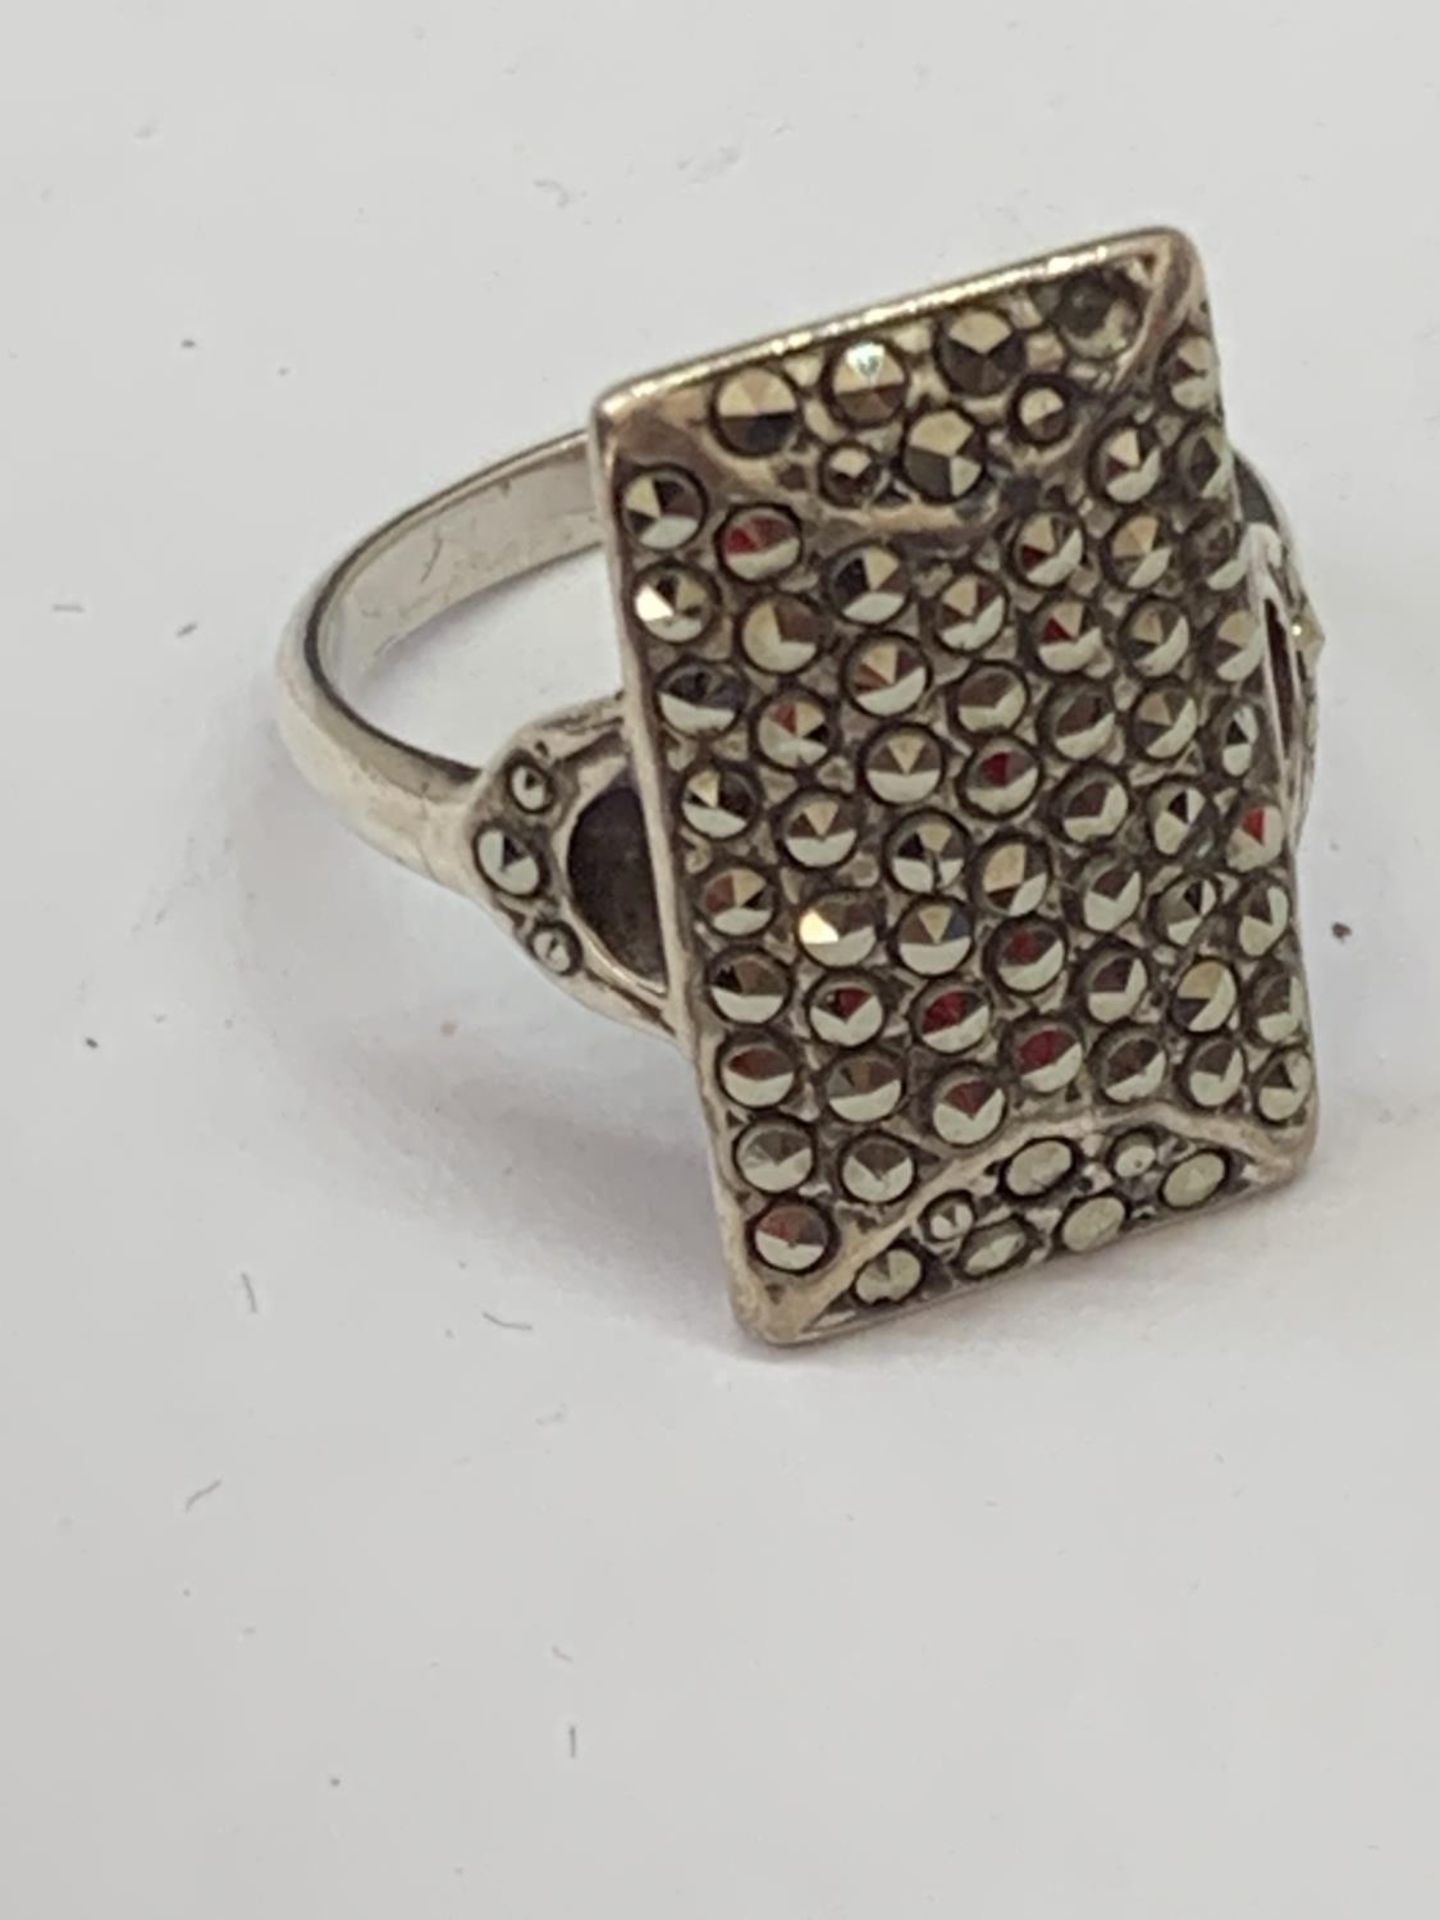 A SILVER RING IN A PRESENTATION BOX - Image 2 of 3